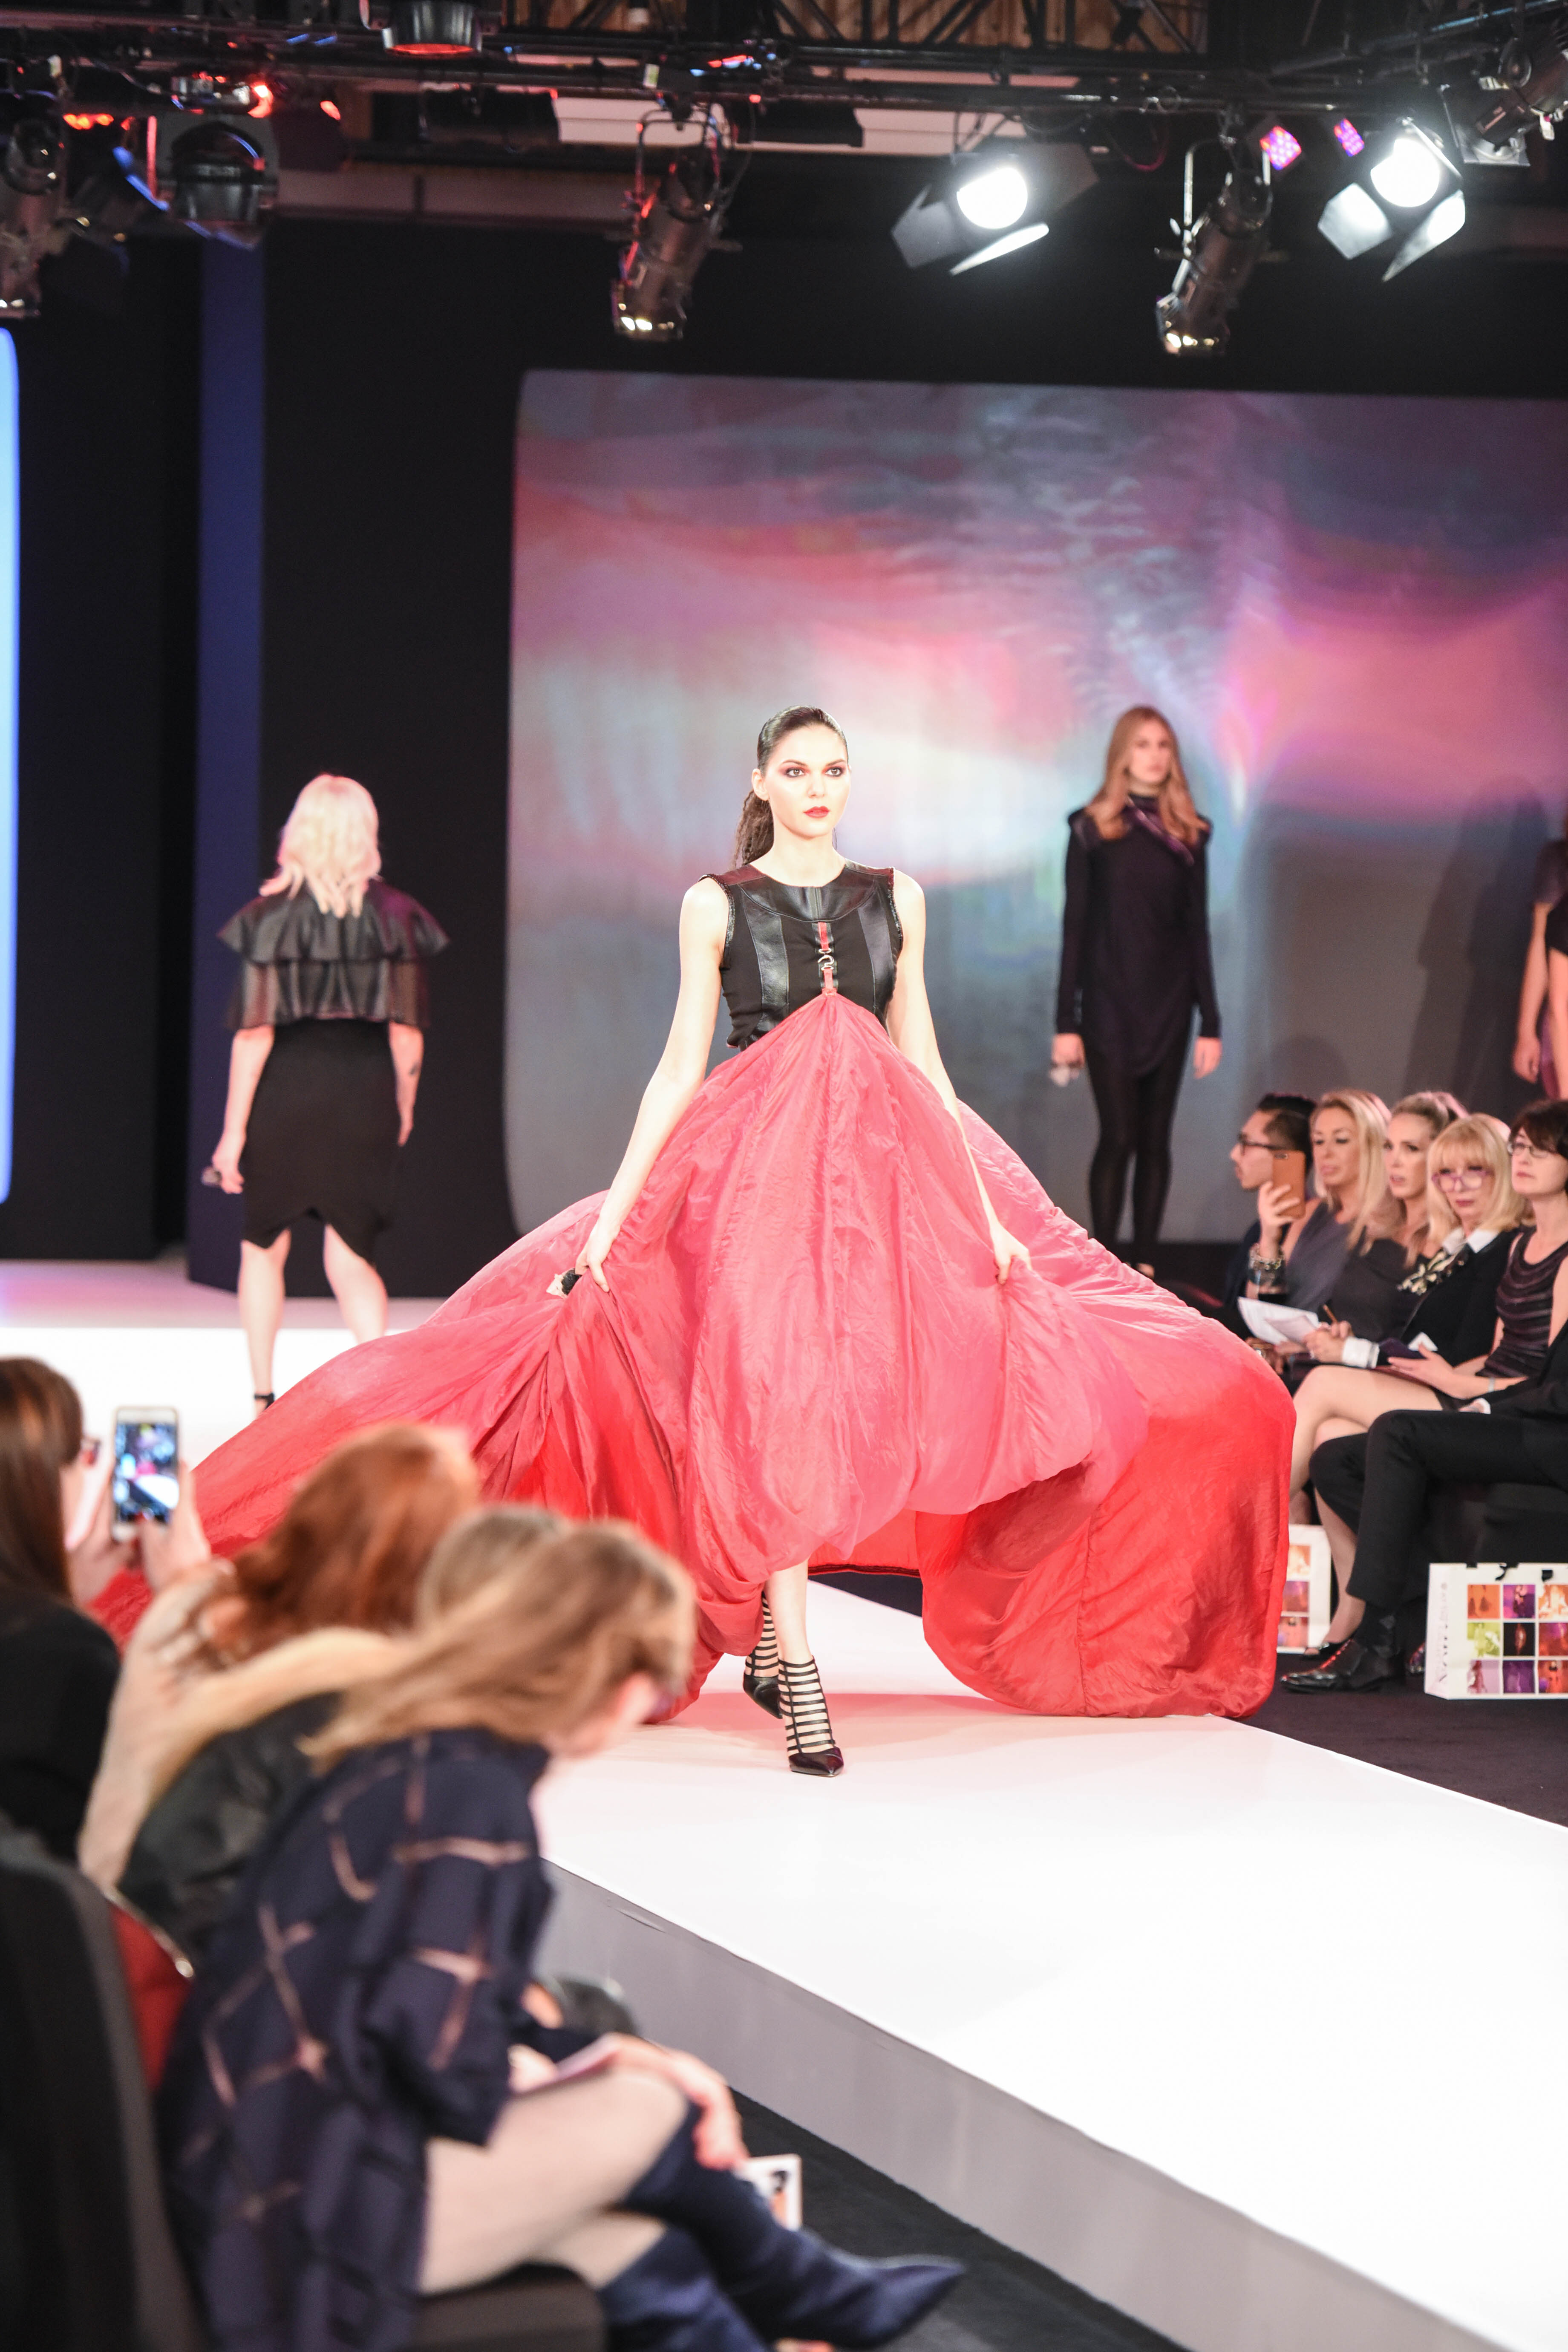 An allexclusive guide to Fashion Week at the Bellevue Collection